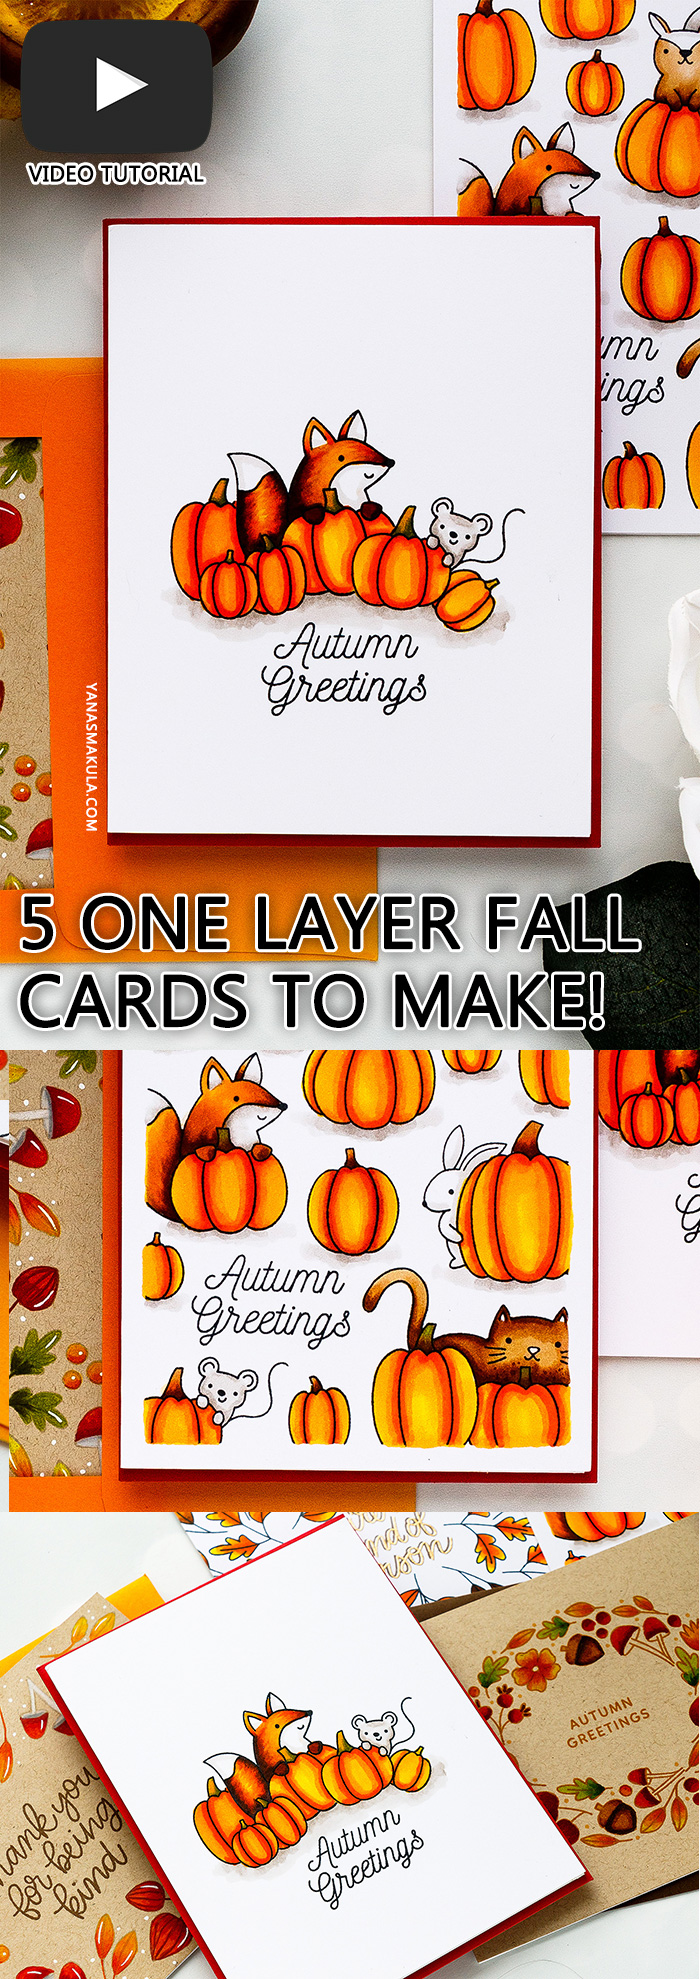 One Layer Stamping - Fall Cards 5 Ways with Pretty Pink Posh Pumpkin Patch Critters, Simple Sayings: Kind and Autumn Wreath stamp sets #yscardmaking #stamping #prettypinkposh #onelayercard #fallcard #autumncard